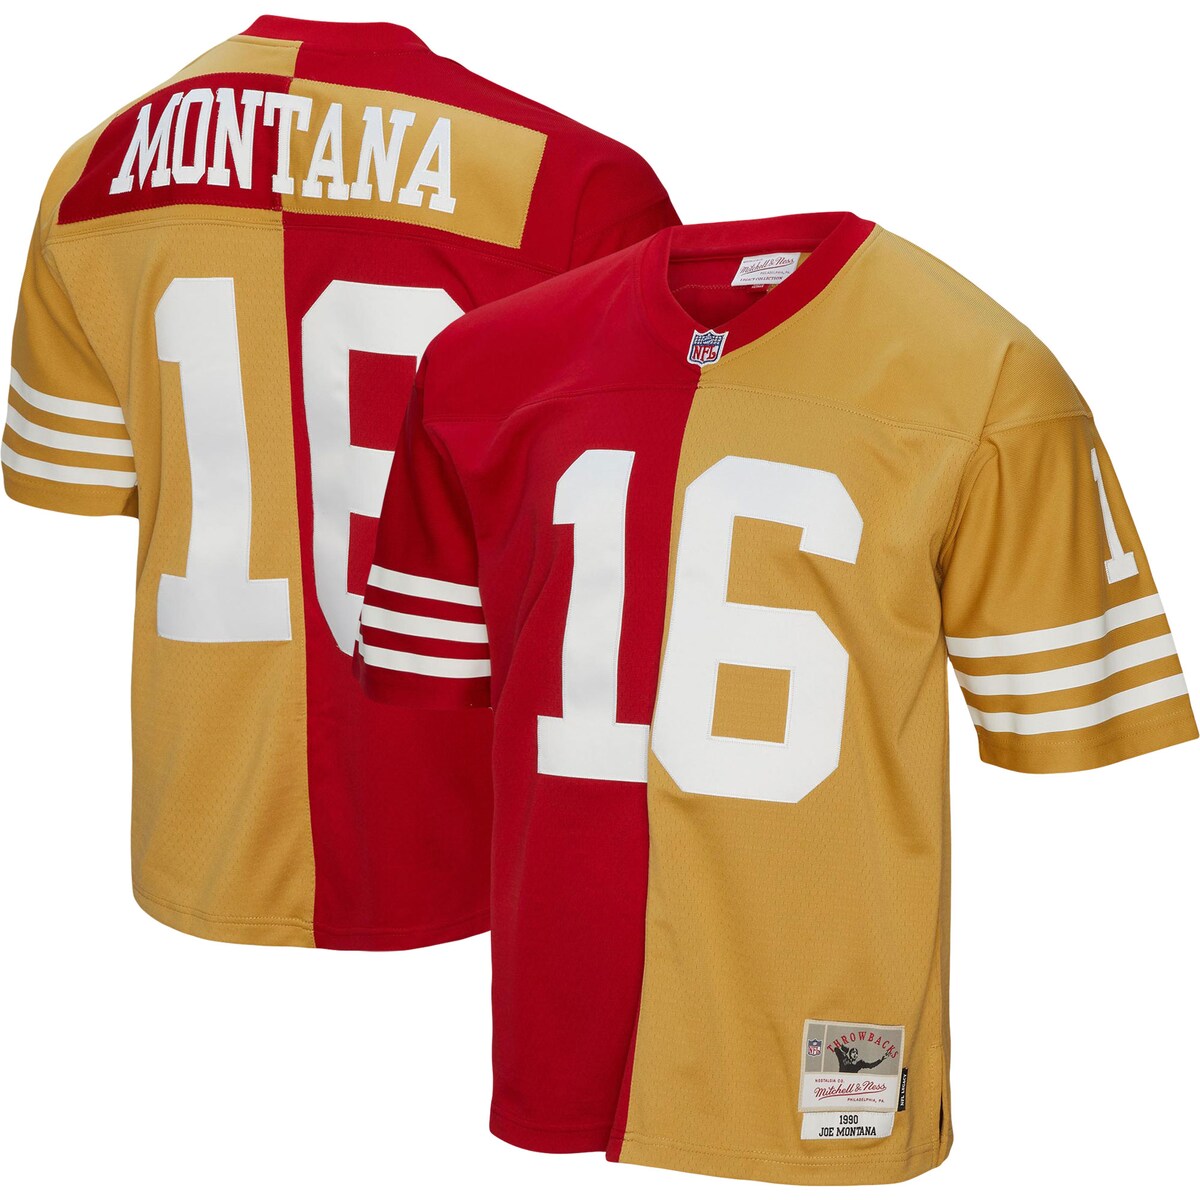 Showcase your love for one of the greatest players of all time in a fresh and unique way with this Joe Montana Split Legacy jersey from Mitchell & Ness. This contrasting San Francisco 49ers jersey design features the name and number across multiple colors and trims, allowing you to boast your Joe Montana spirit loud and proud. Additionally, the lightweight design and droptail hem bring comfort to your San Francisco 49ers game day gear.Machine wash, line dryOfficially licensedMaterial: 100% PolyesterReplica Throwback JerseyWoven tags at bottom hemImportedStitched NFL Shield at collarV-neckTackle twill graphicsShort sleevesBrand: Mitchell & NessSide split hemMesh fabric